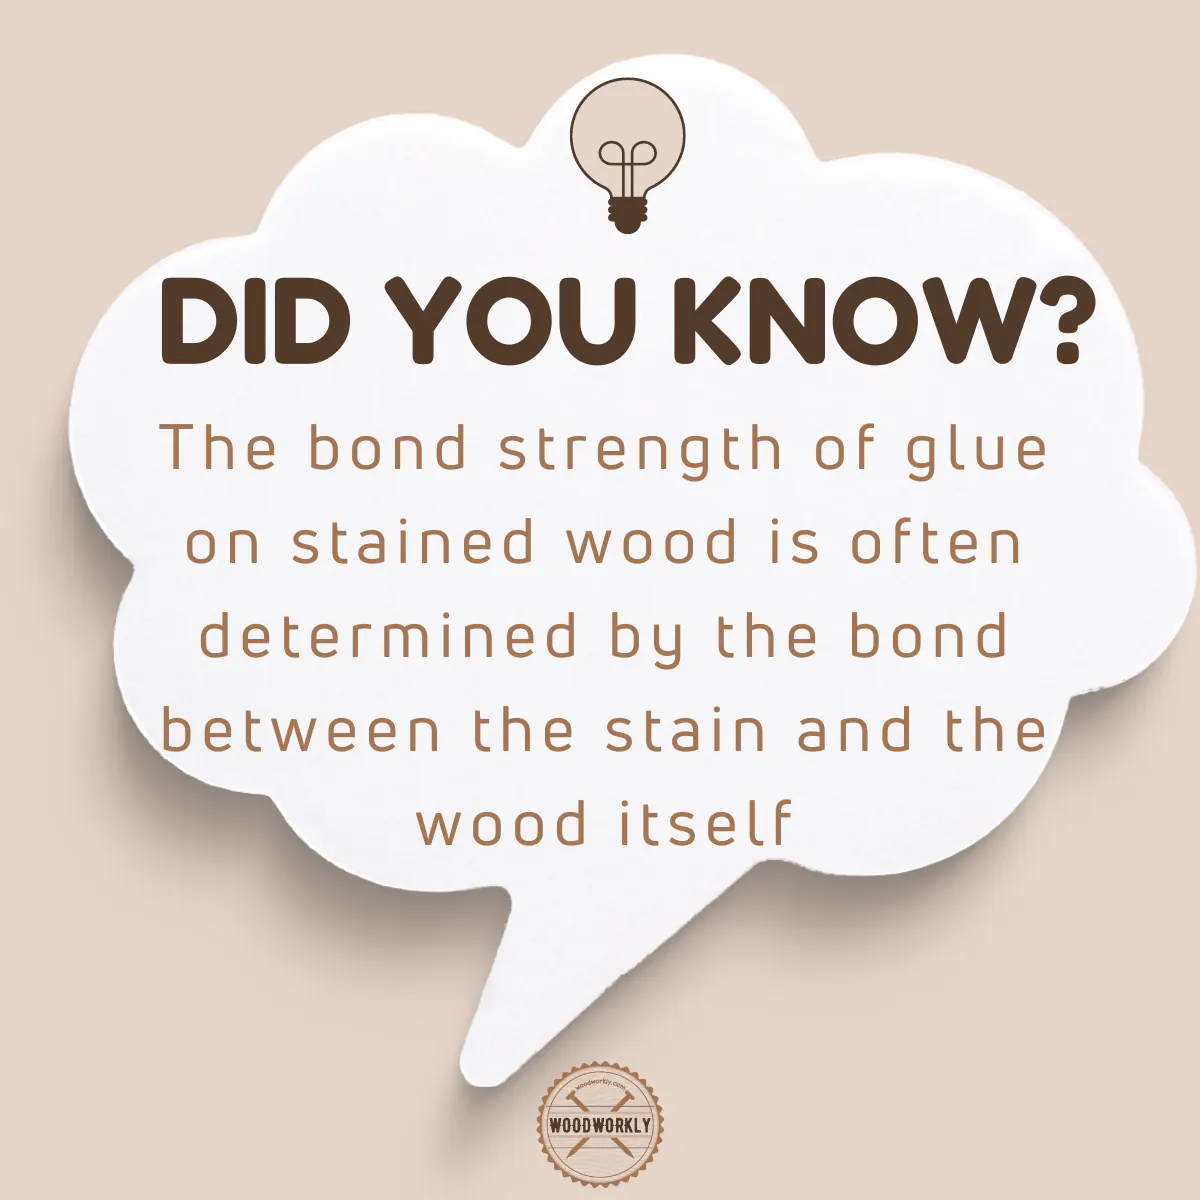 Did you know fact about Gluing stained wood